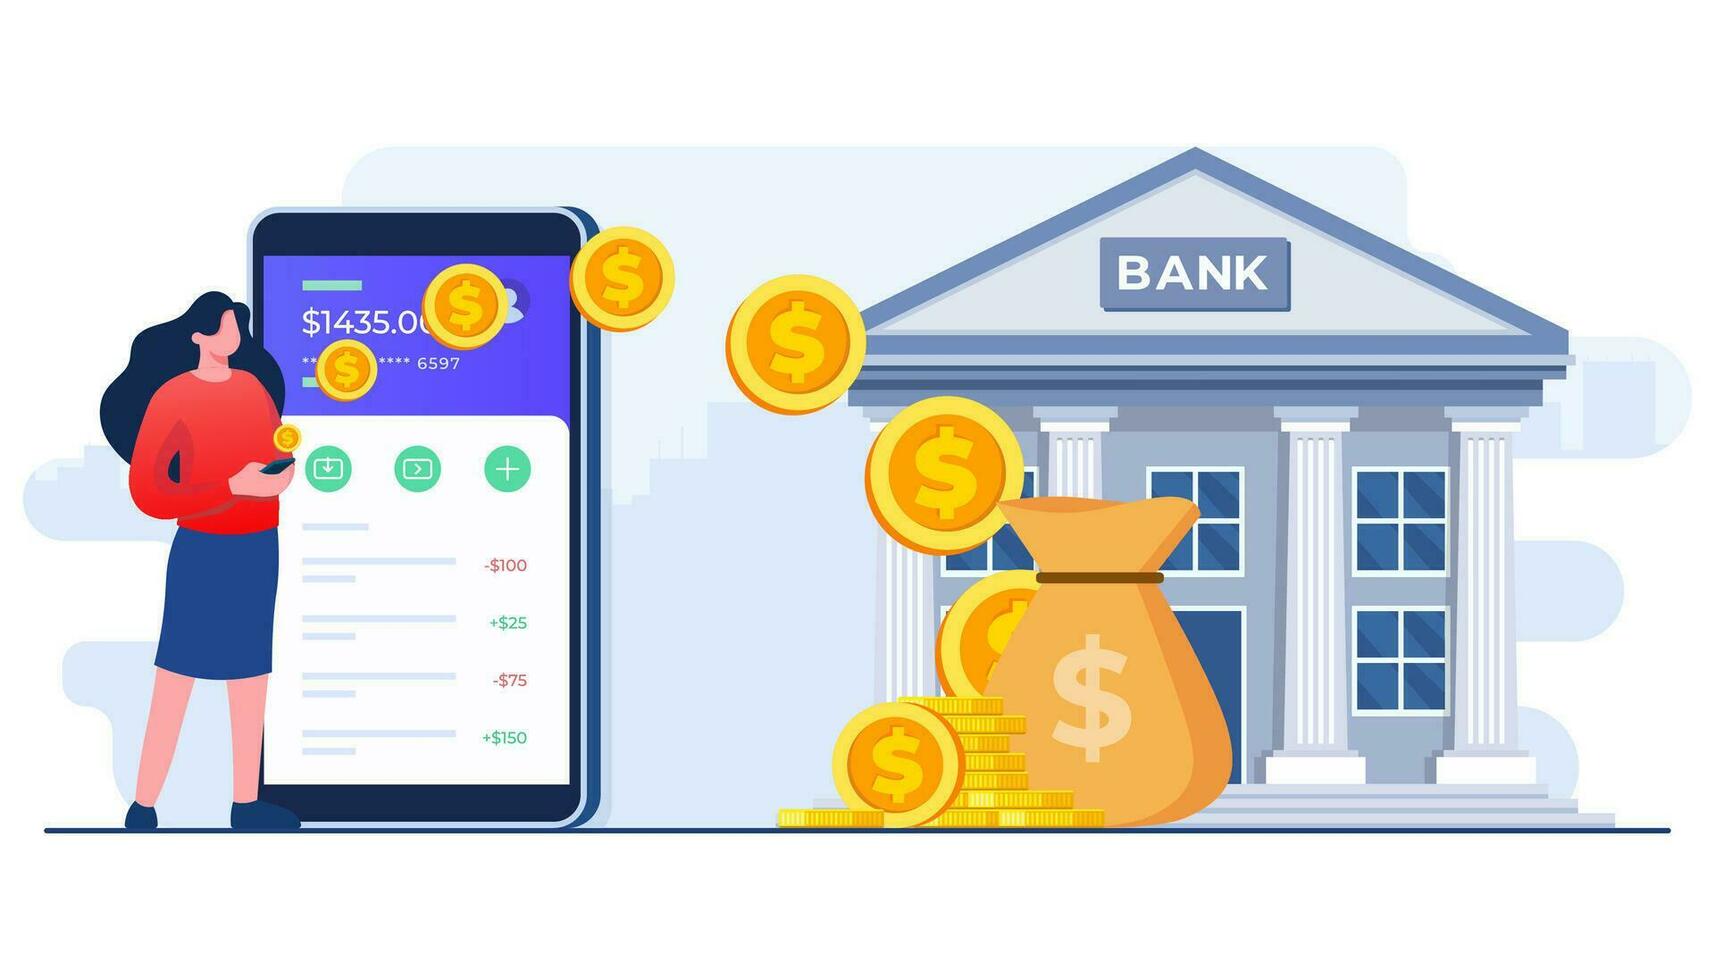 People send and receive money through online banking mobile app, Electronic wallet, Mobile bank transaction, Secure money transfer gateway flat illustration vector template, Digital banking mobile app